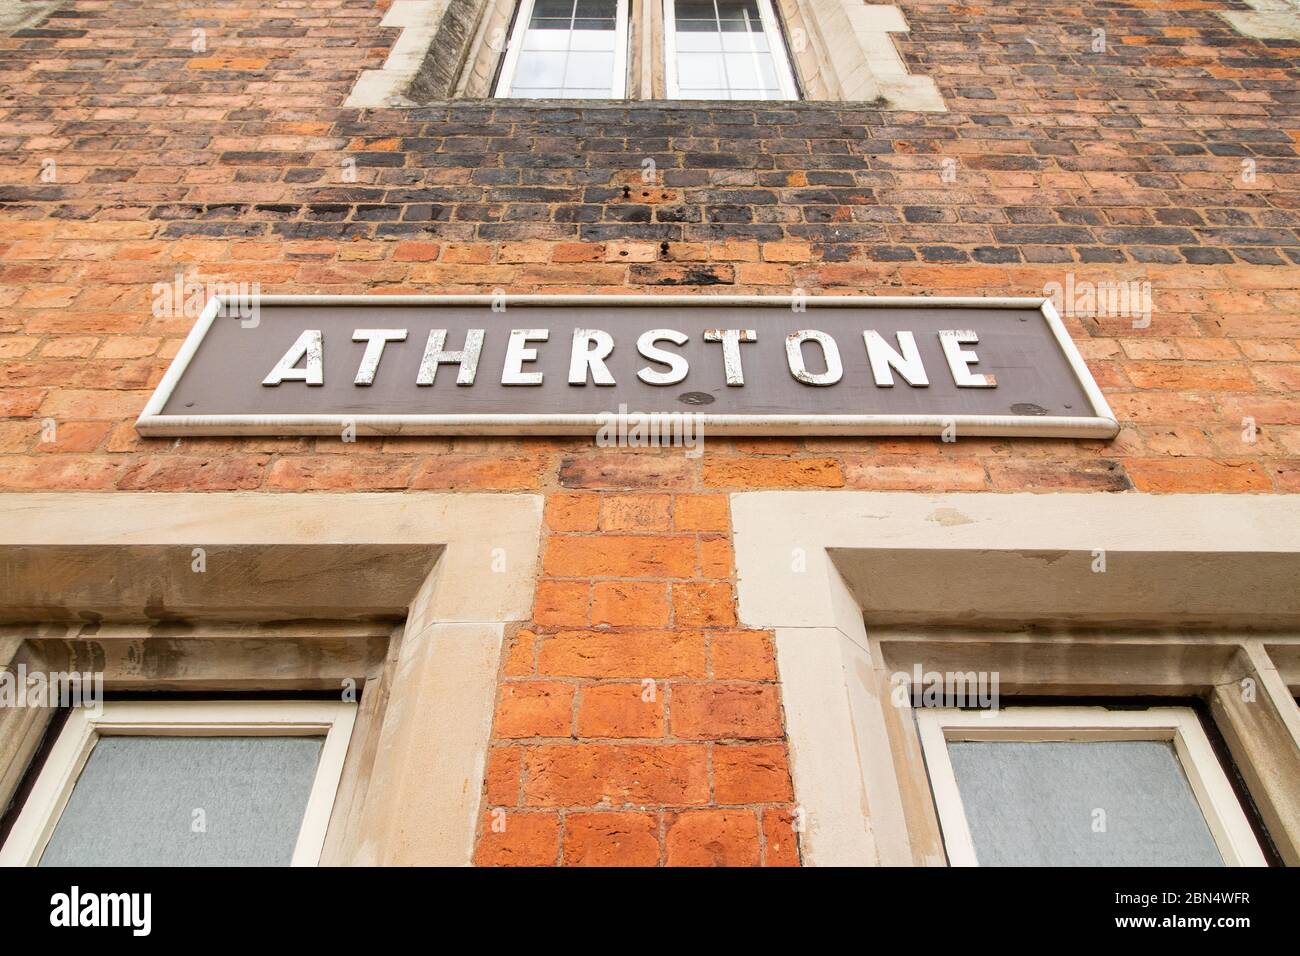 The old original train signs on the side of the platform buildings on the London North Western train station, Atherstone, North Warwickshire. The station was once a main line station, it now has trains running to London, although high speed trains pass directly through the station. Stock Photo